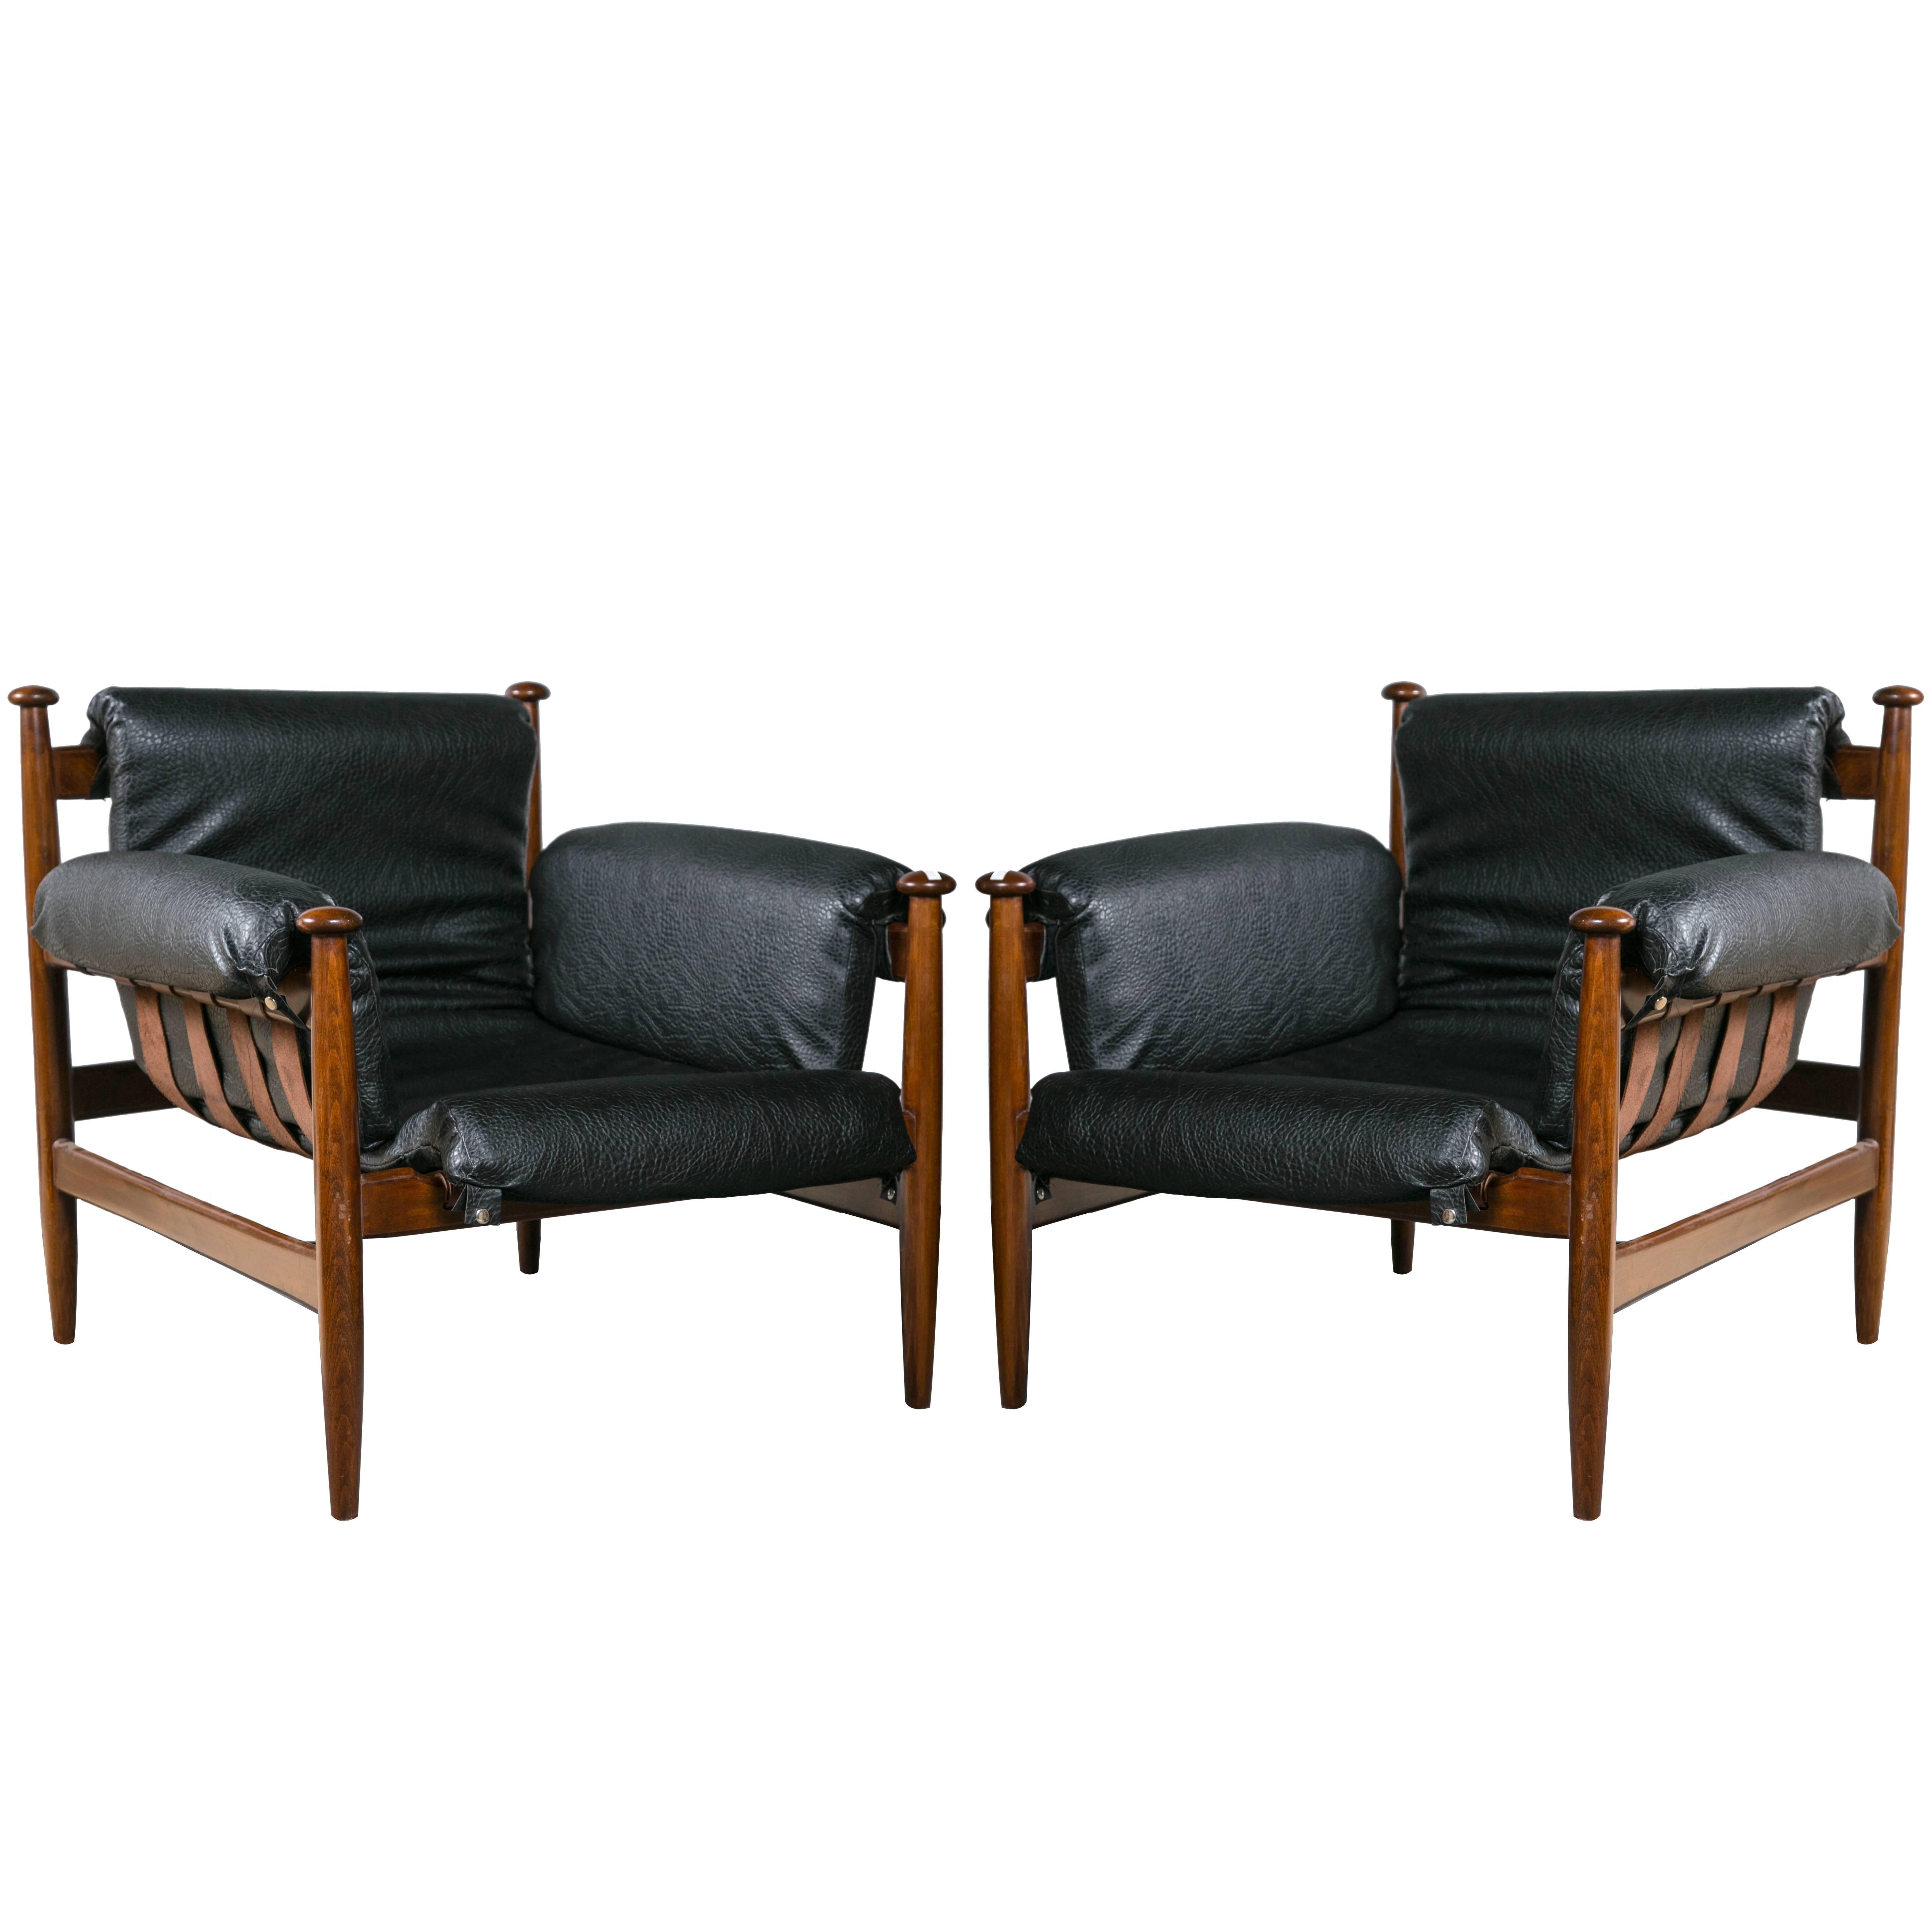 Two Pair of Finn Juhl Style Lounge Chairs Price per Pair. 